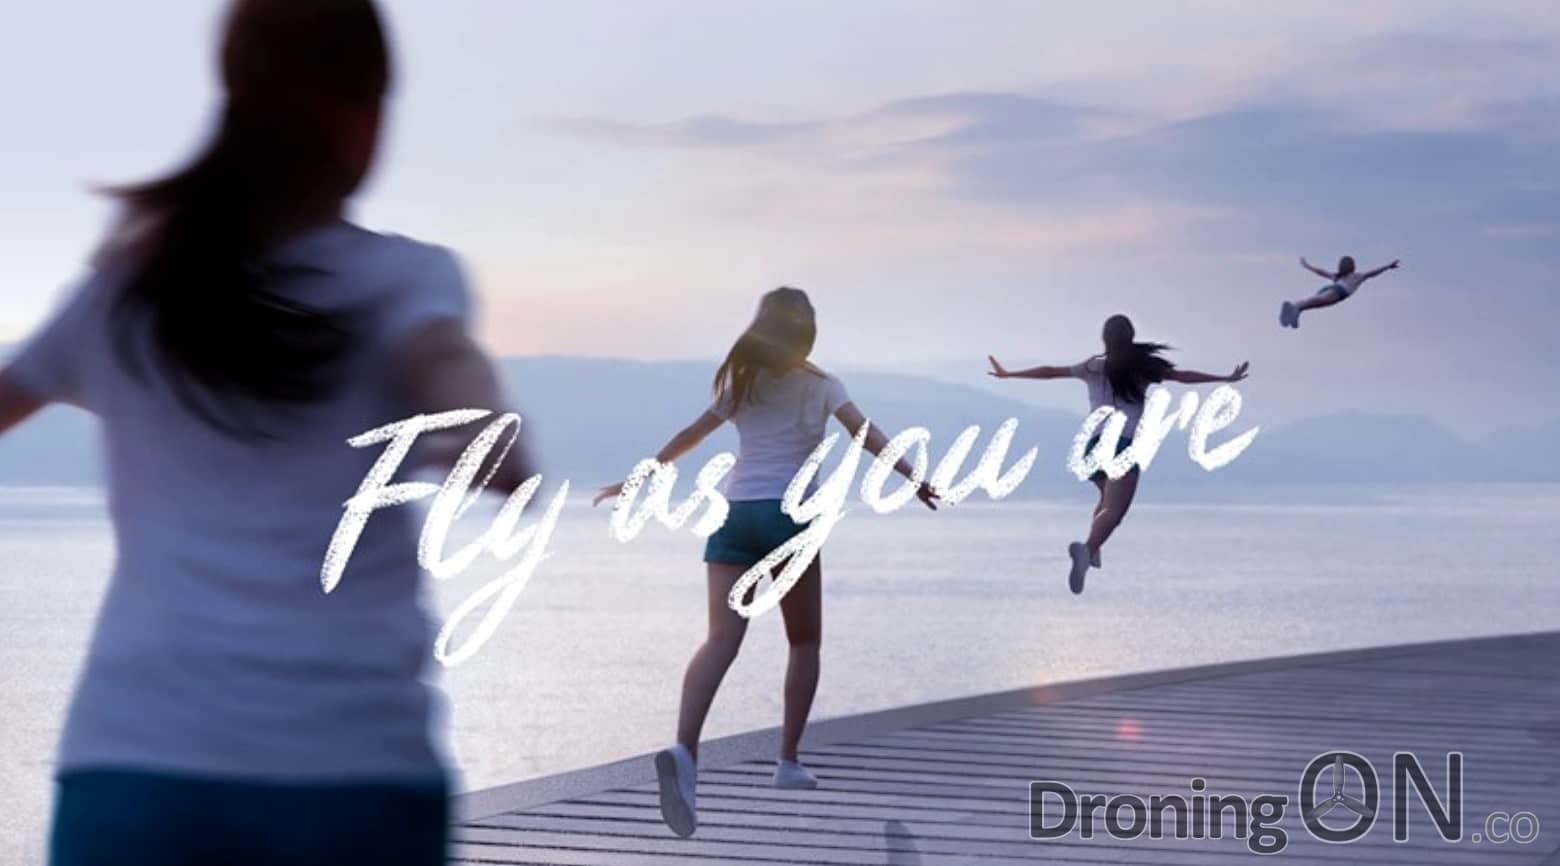 Fly As You Are from DJI